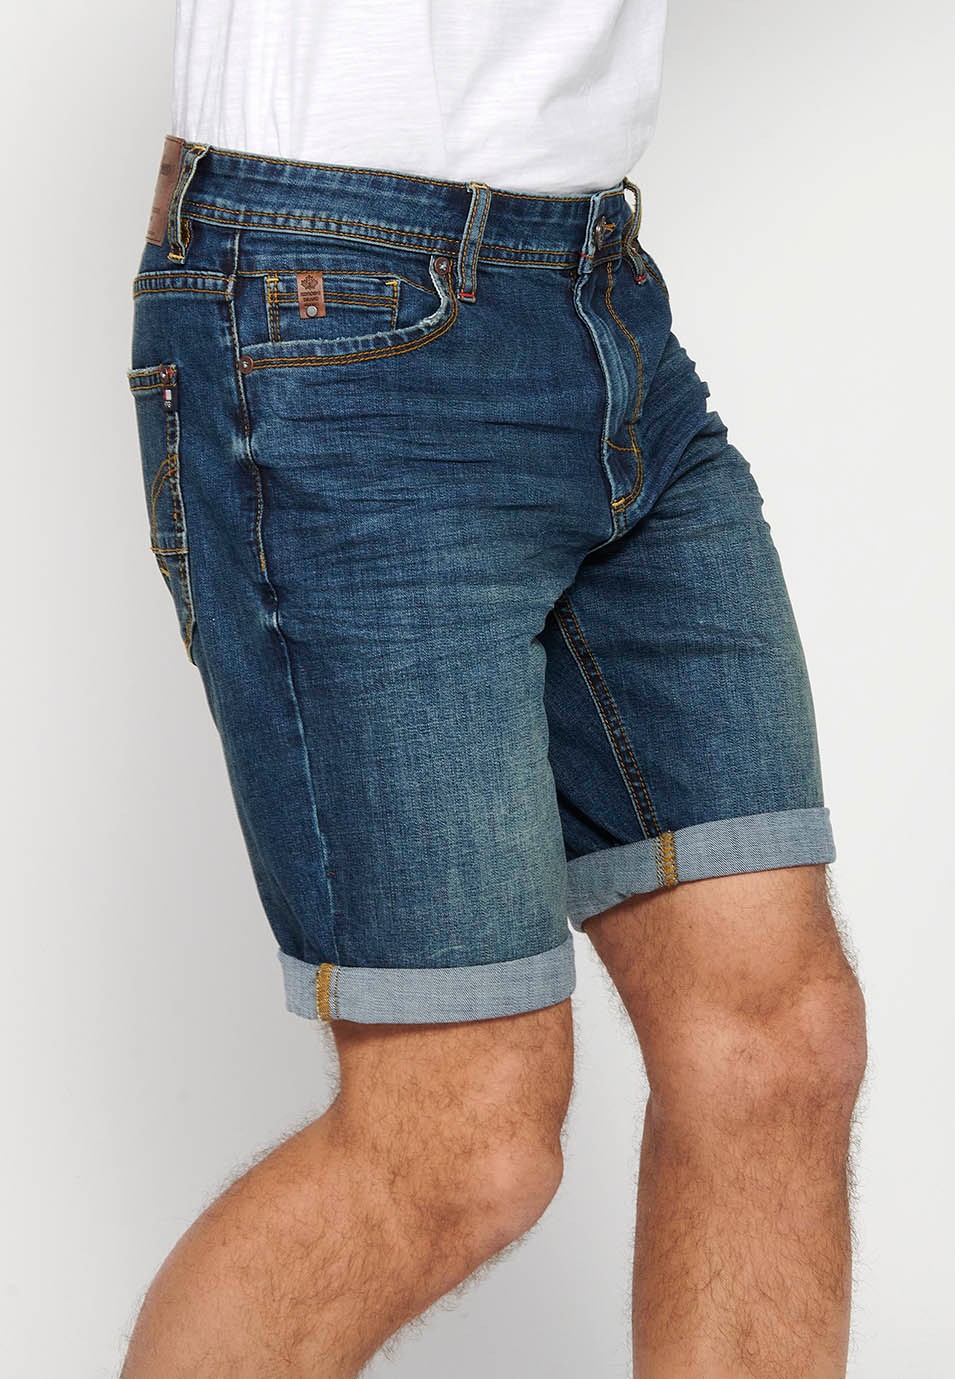 Bermuda denim shorts with front zipper and button closure with five pockets, one blue pocket pocket for Men 4